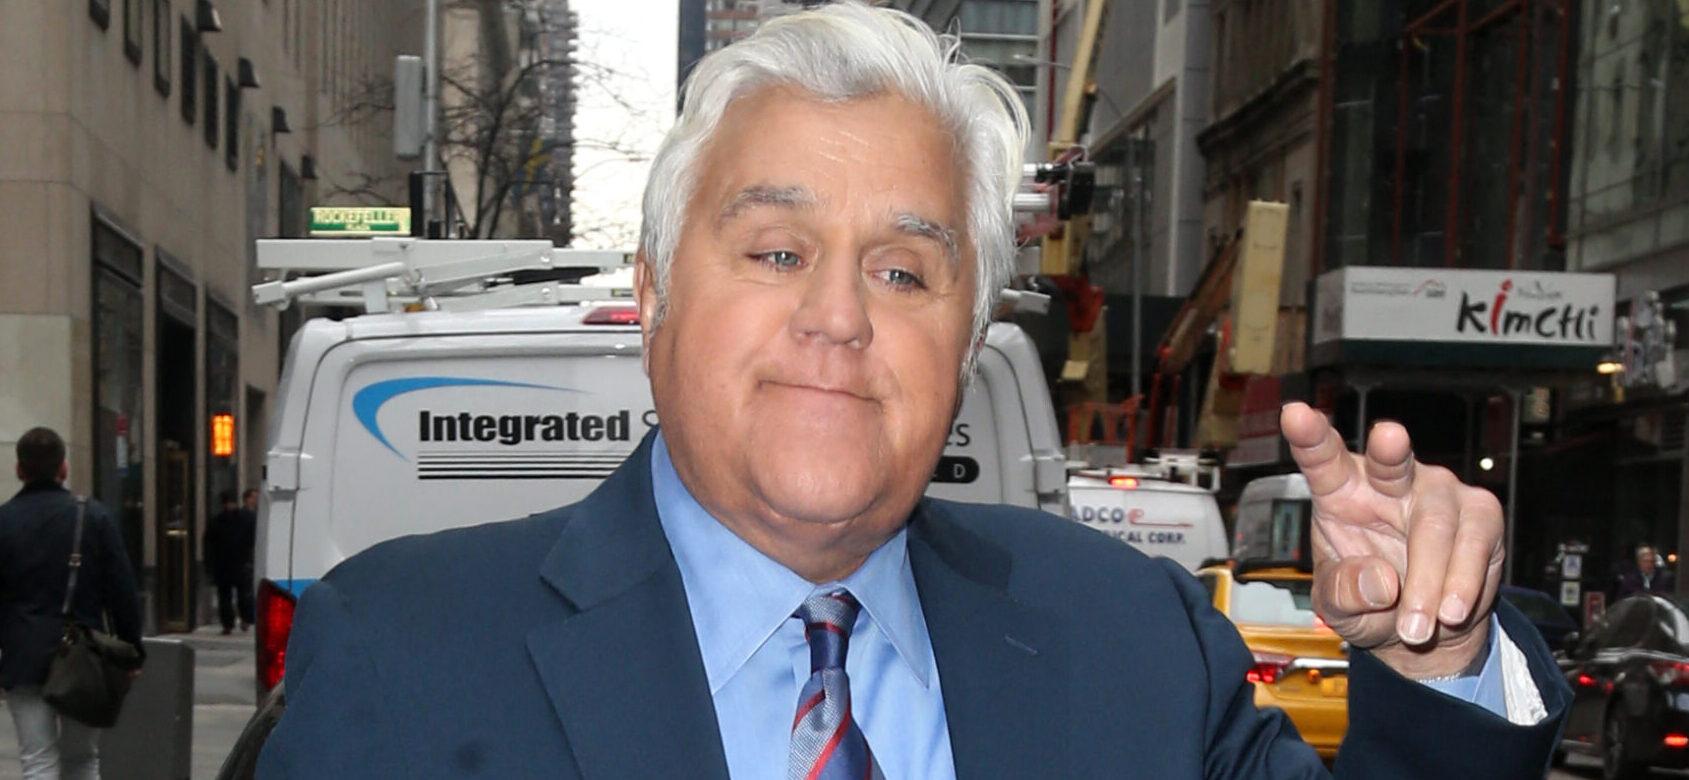 Jay Leno Predicts ‘Falling Off’ Motorcycles After Fiery Car Accident!